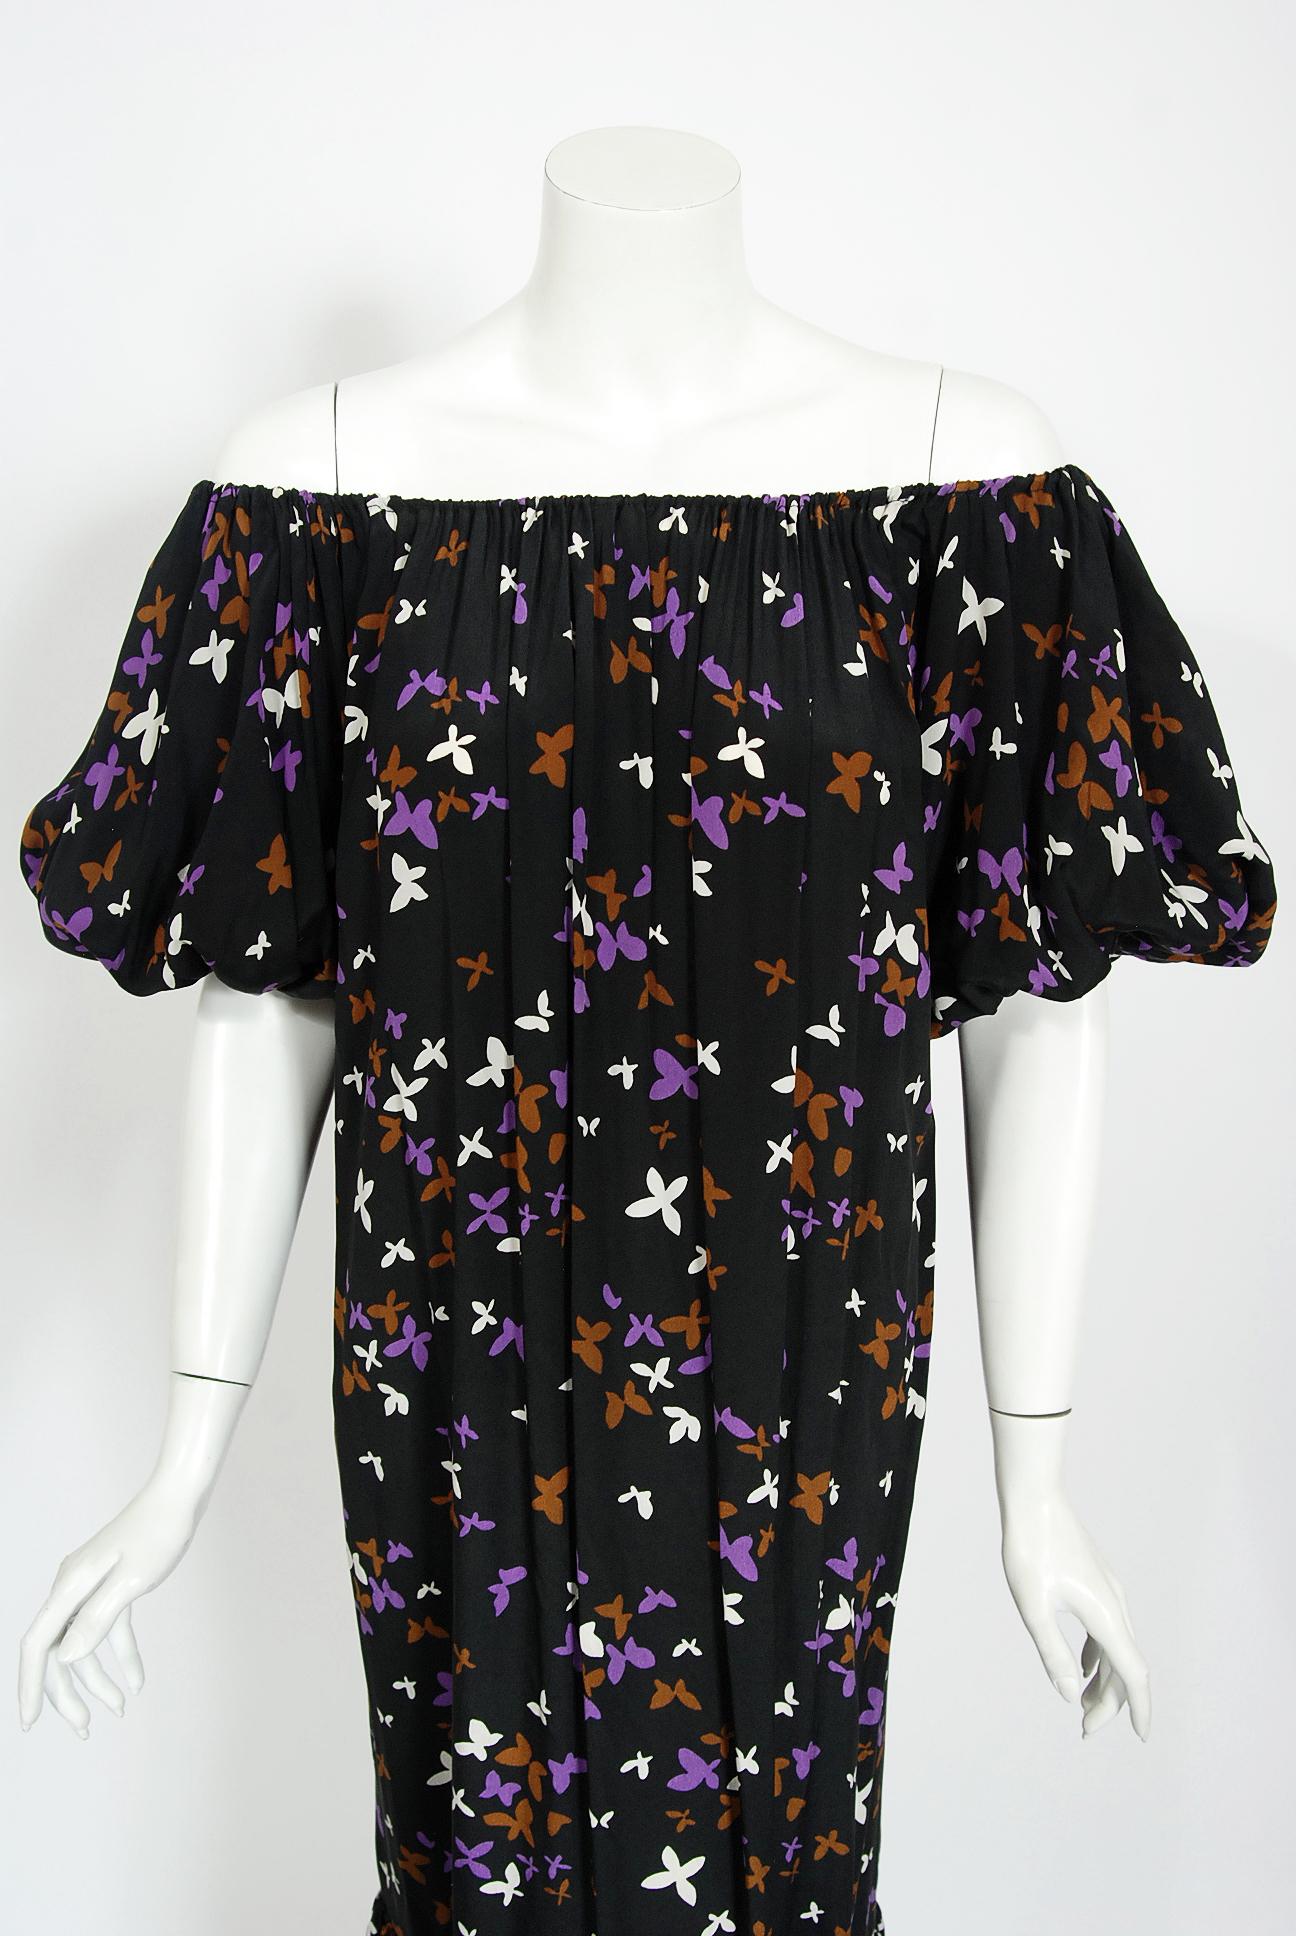 Gorgeous Yves Saint Laurent documented butterfly print rayon dress from the infamous Rive Gauche 1978 spring summer collection. Pieces from this decade are very rare and are true examples of fashion history. I adore the optional off-shoulder